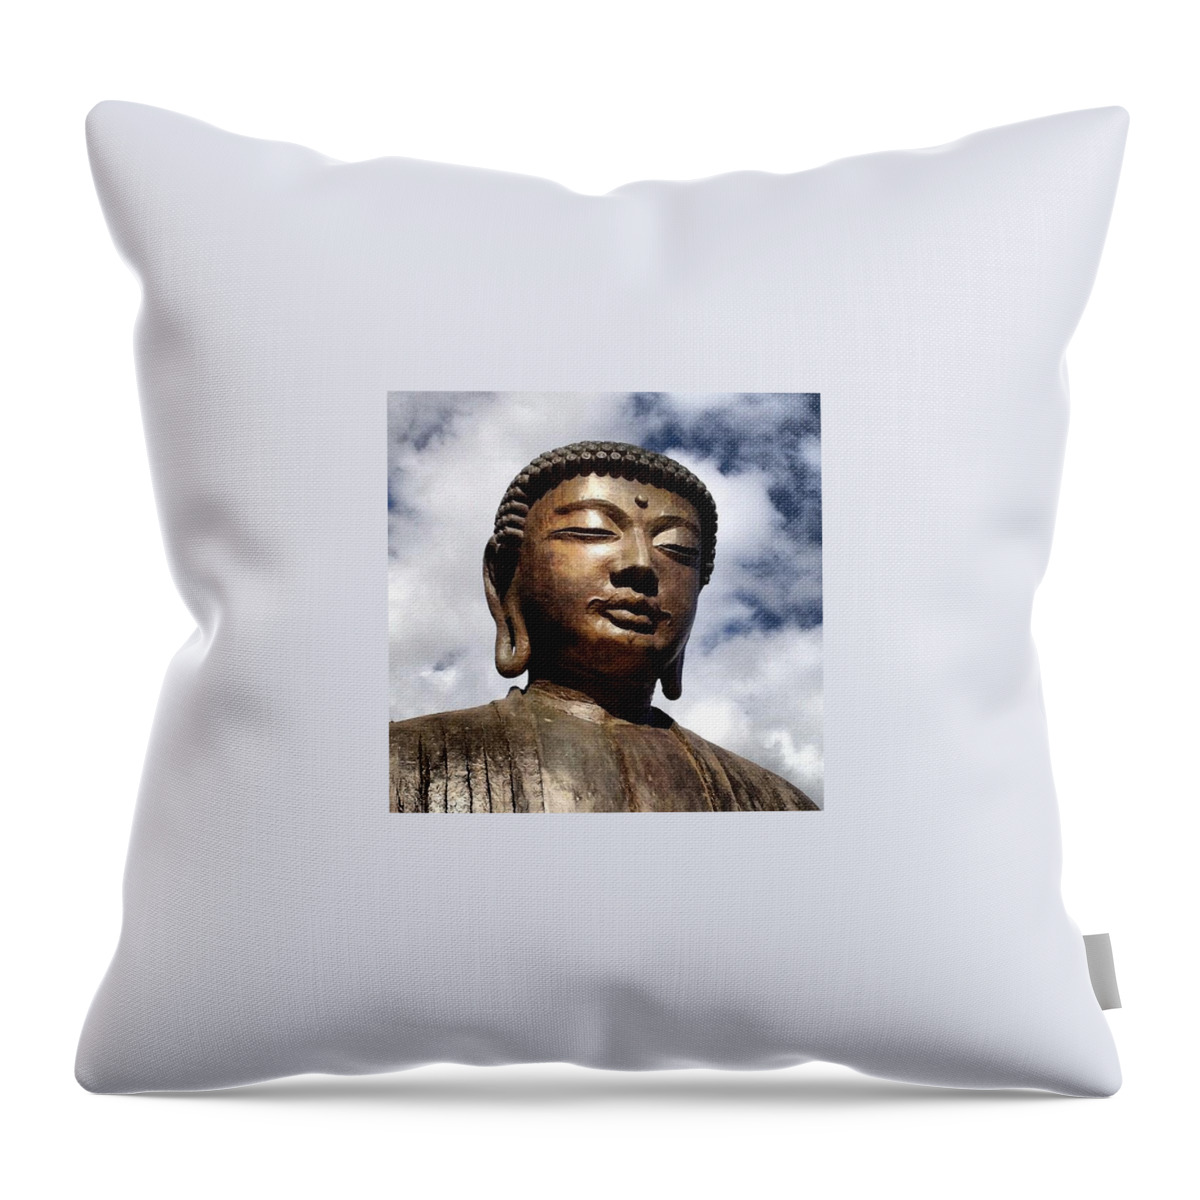 Buddha Throw Pillow featuring the photograph Buddha In The Sky by Darice Machel McGuire